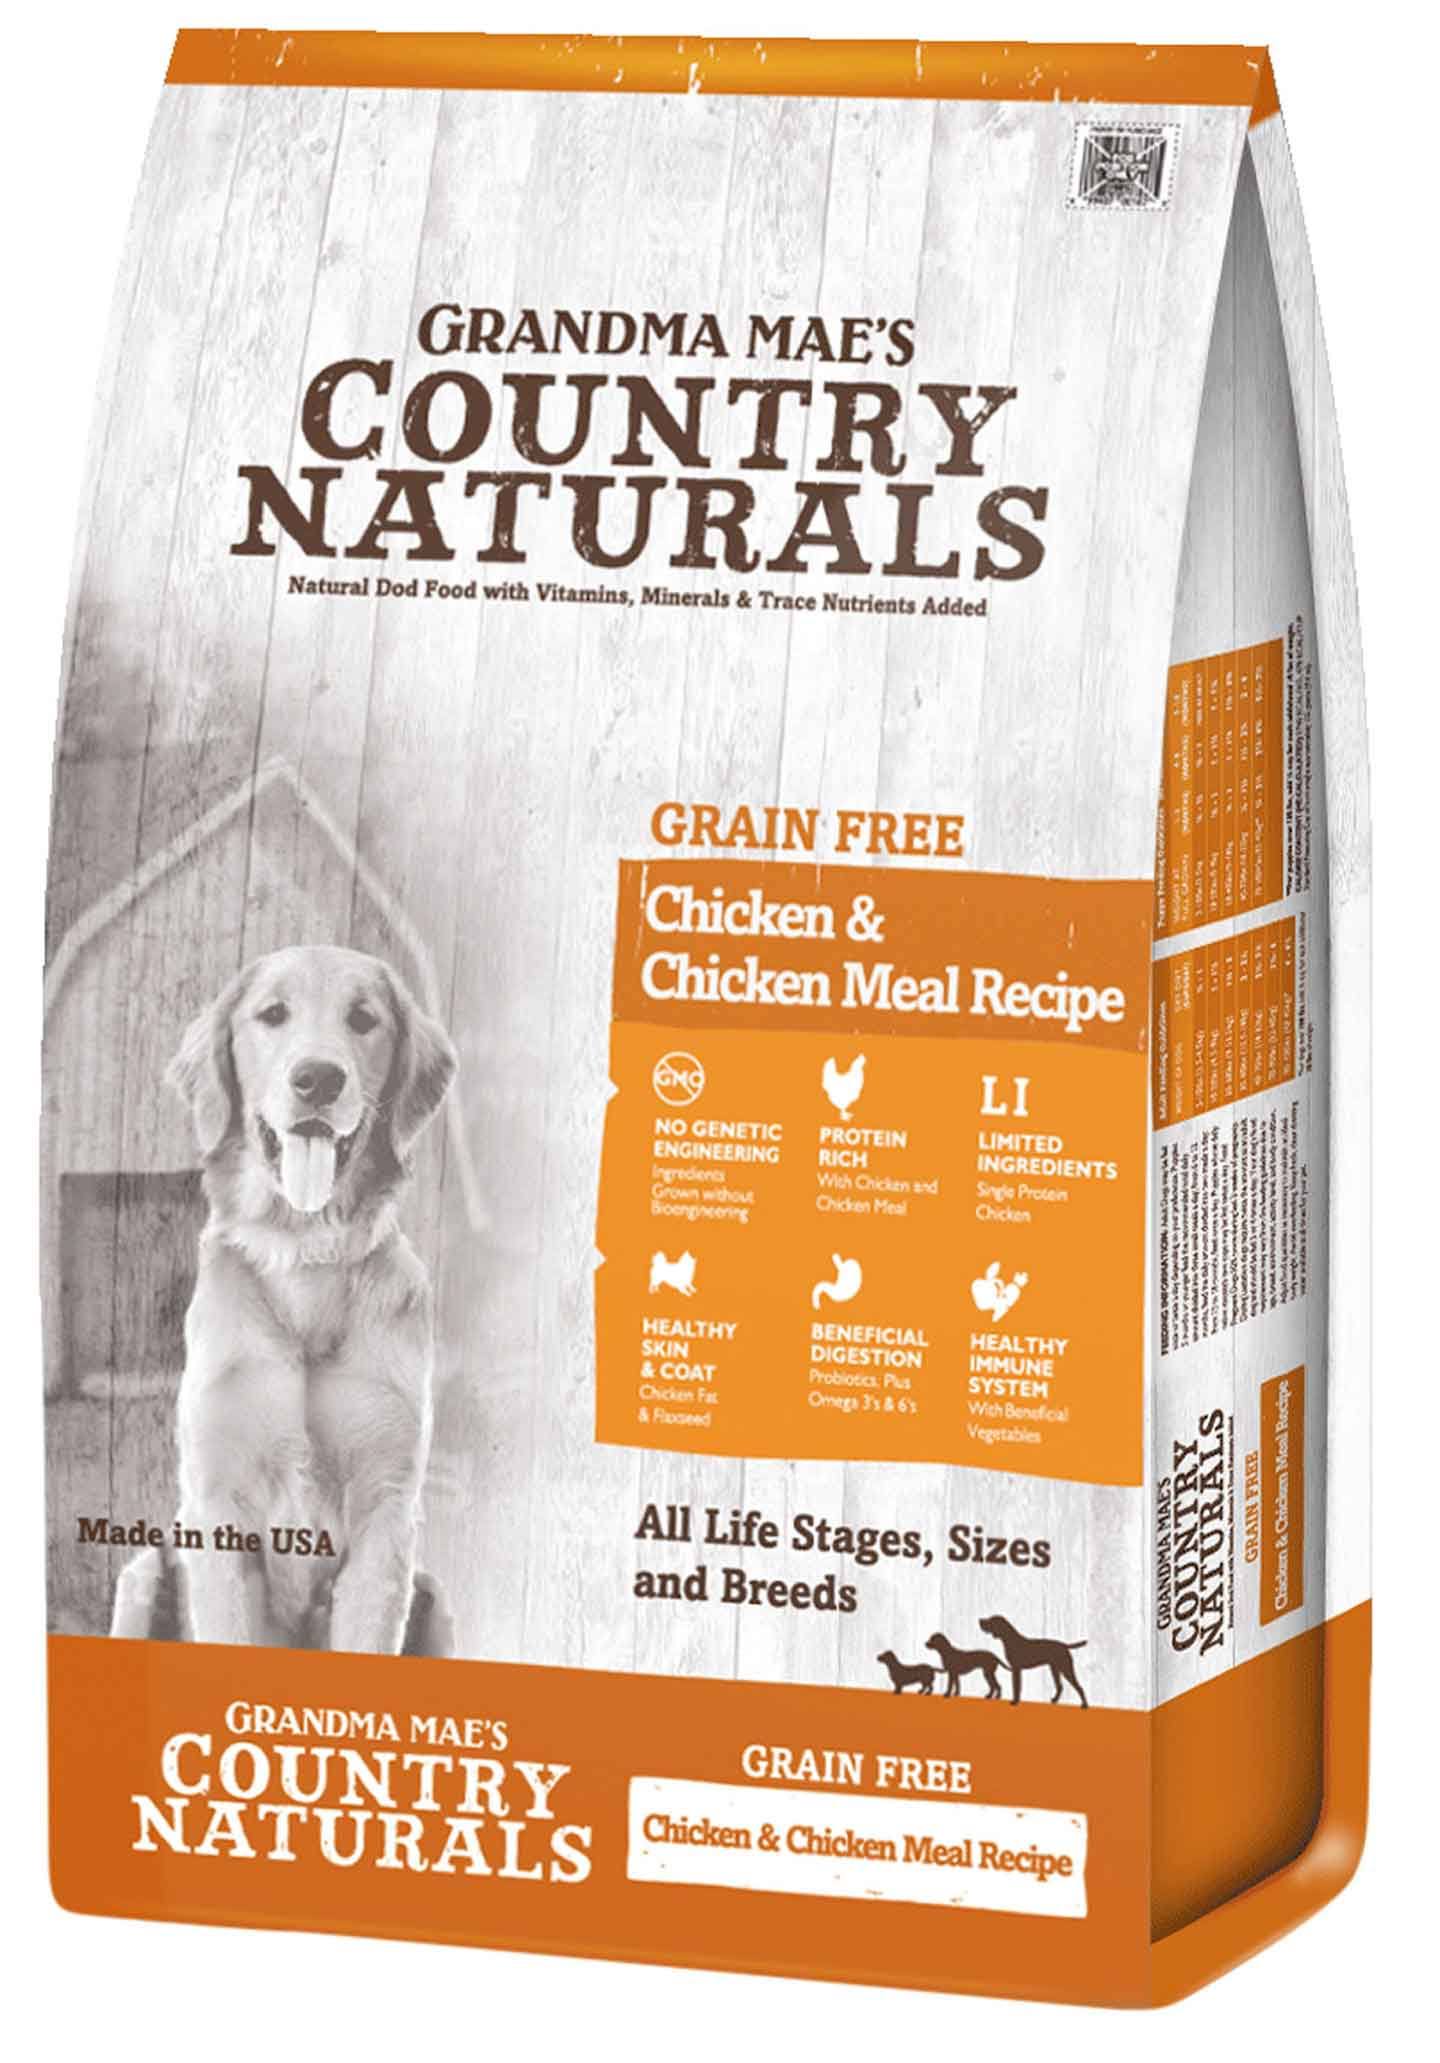 Grandma Mae's Country Naturals, Grain Free Chicken Limited Ingredient Dry Dog Food, 4 Pounds